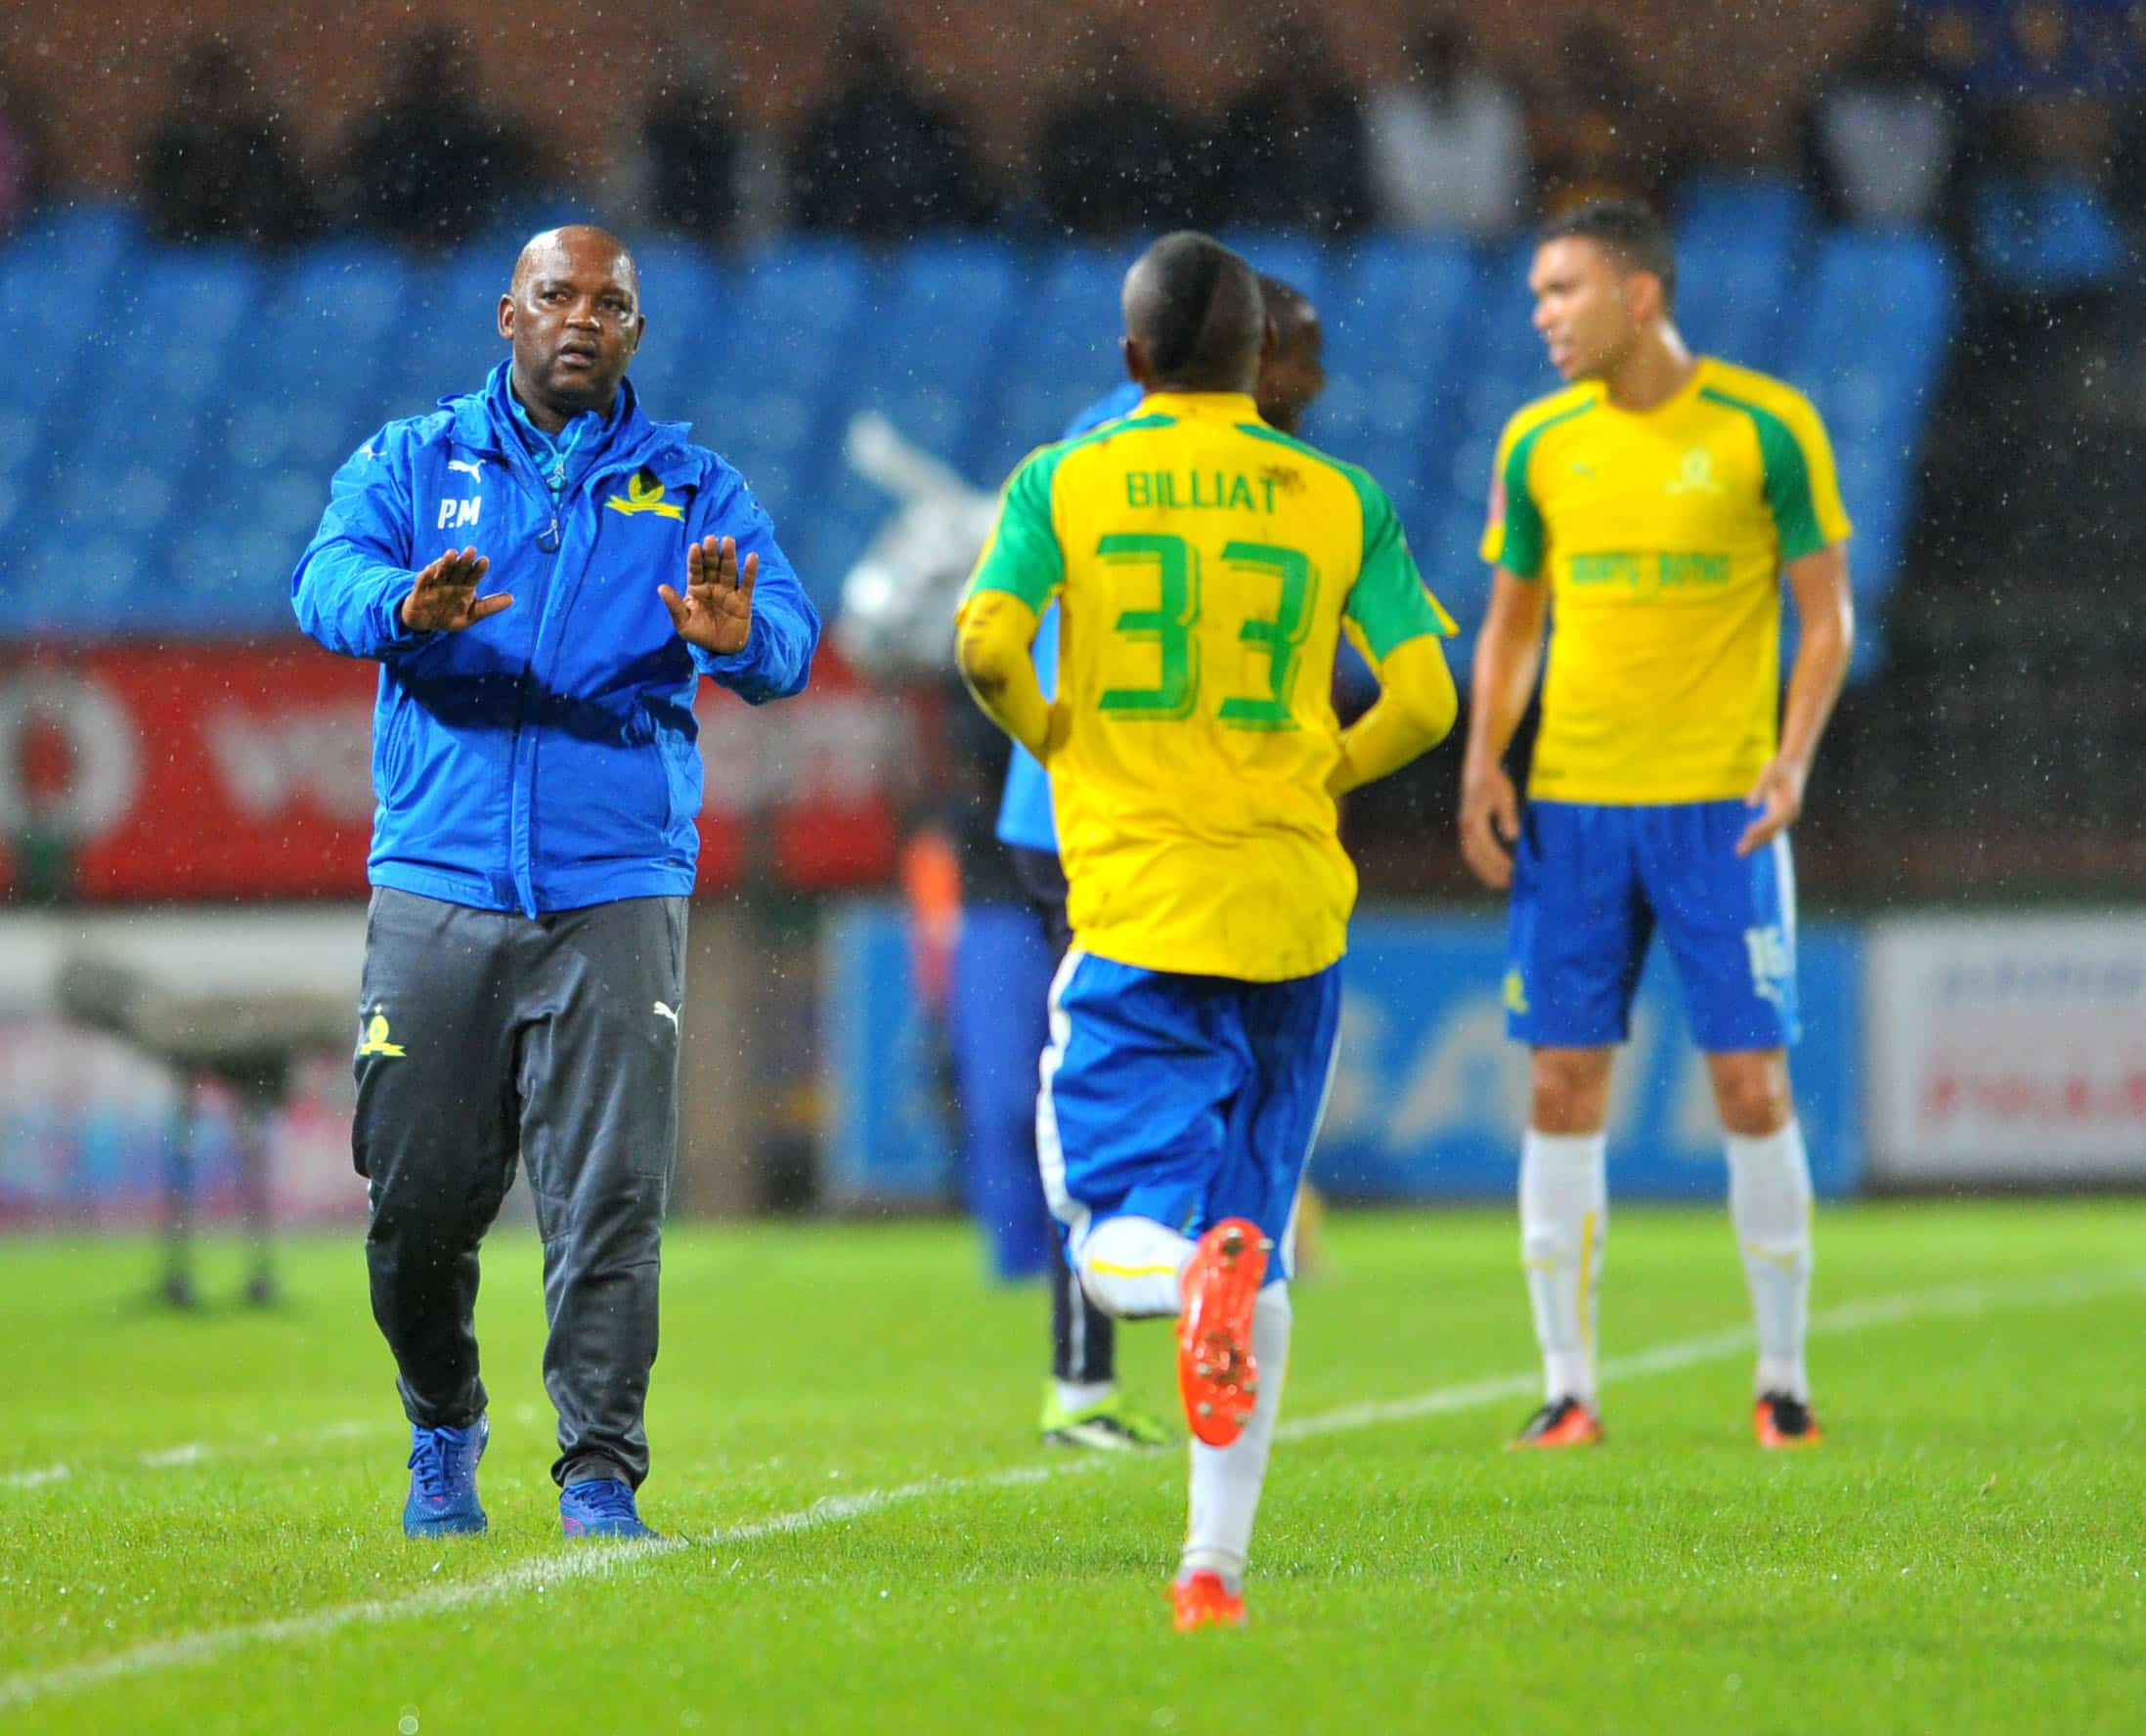 You are currently viewing Mosimane: We want Billiat to stay